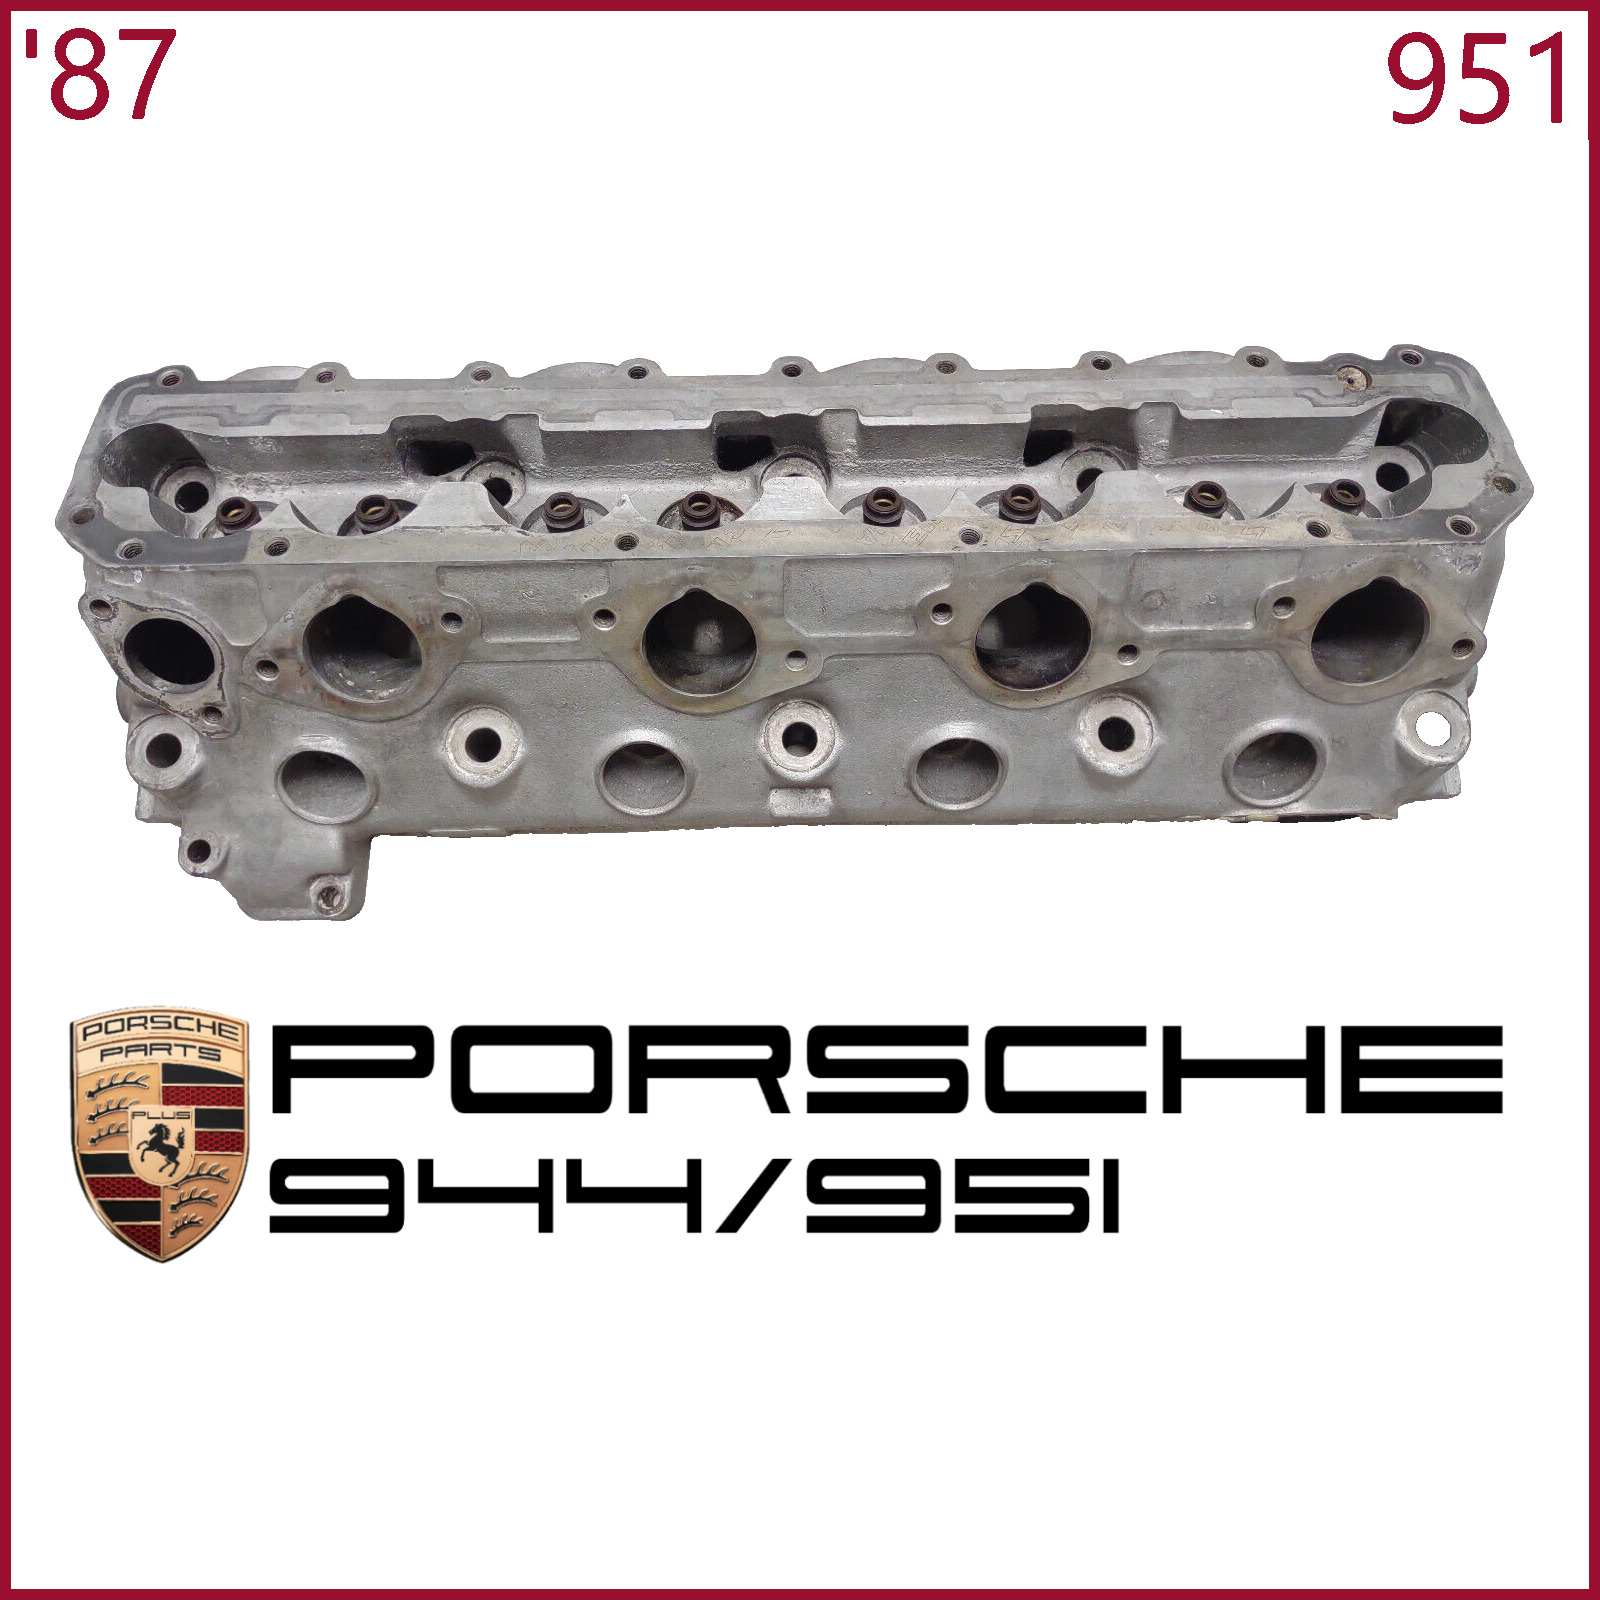 Porsche 944 951 Turbo Cylinder Head Used STRIPPED 951.104.303.1R 85.5-91